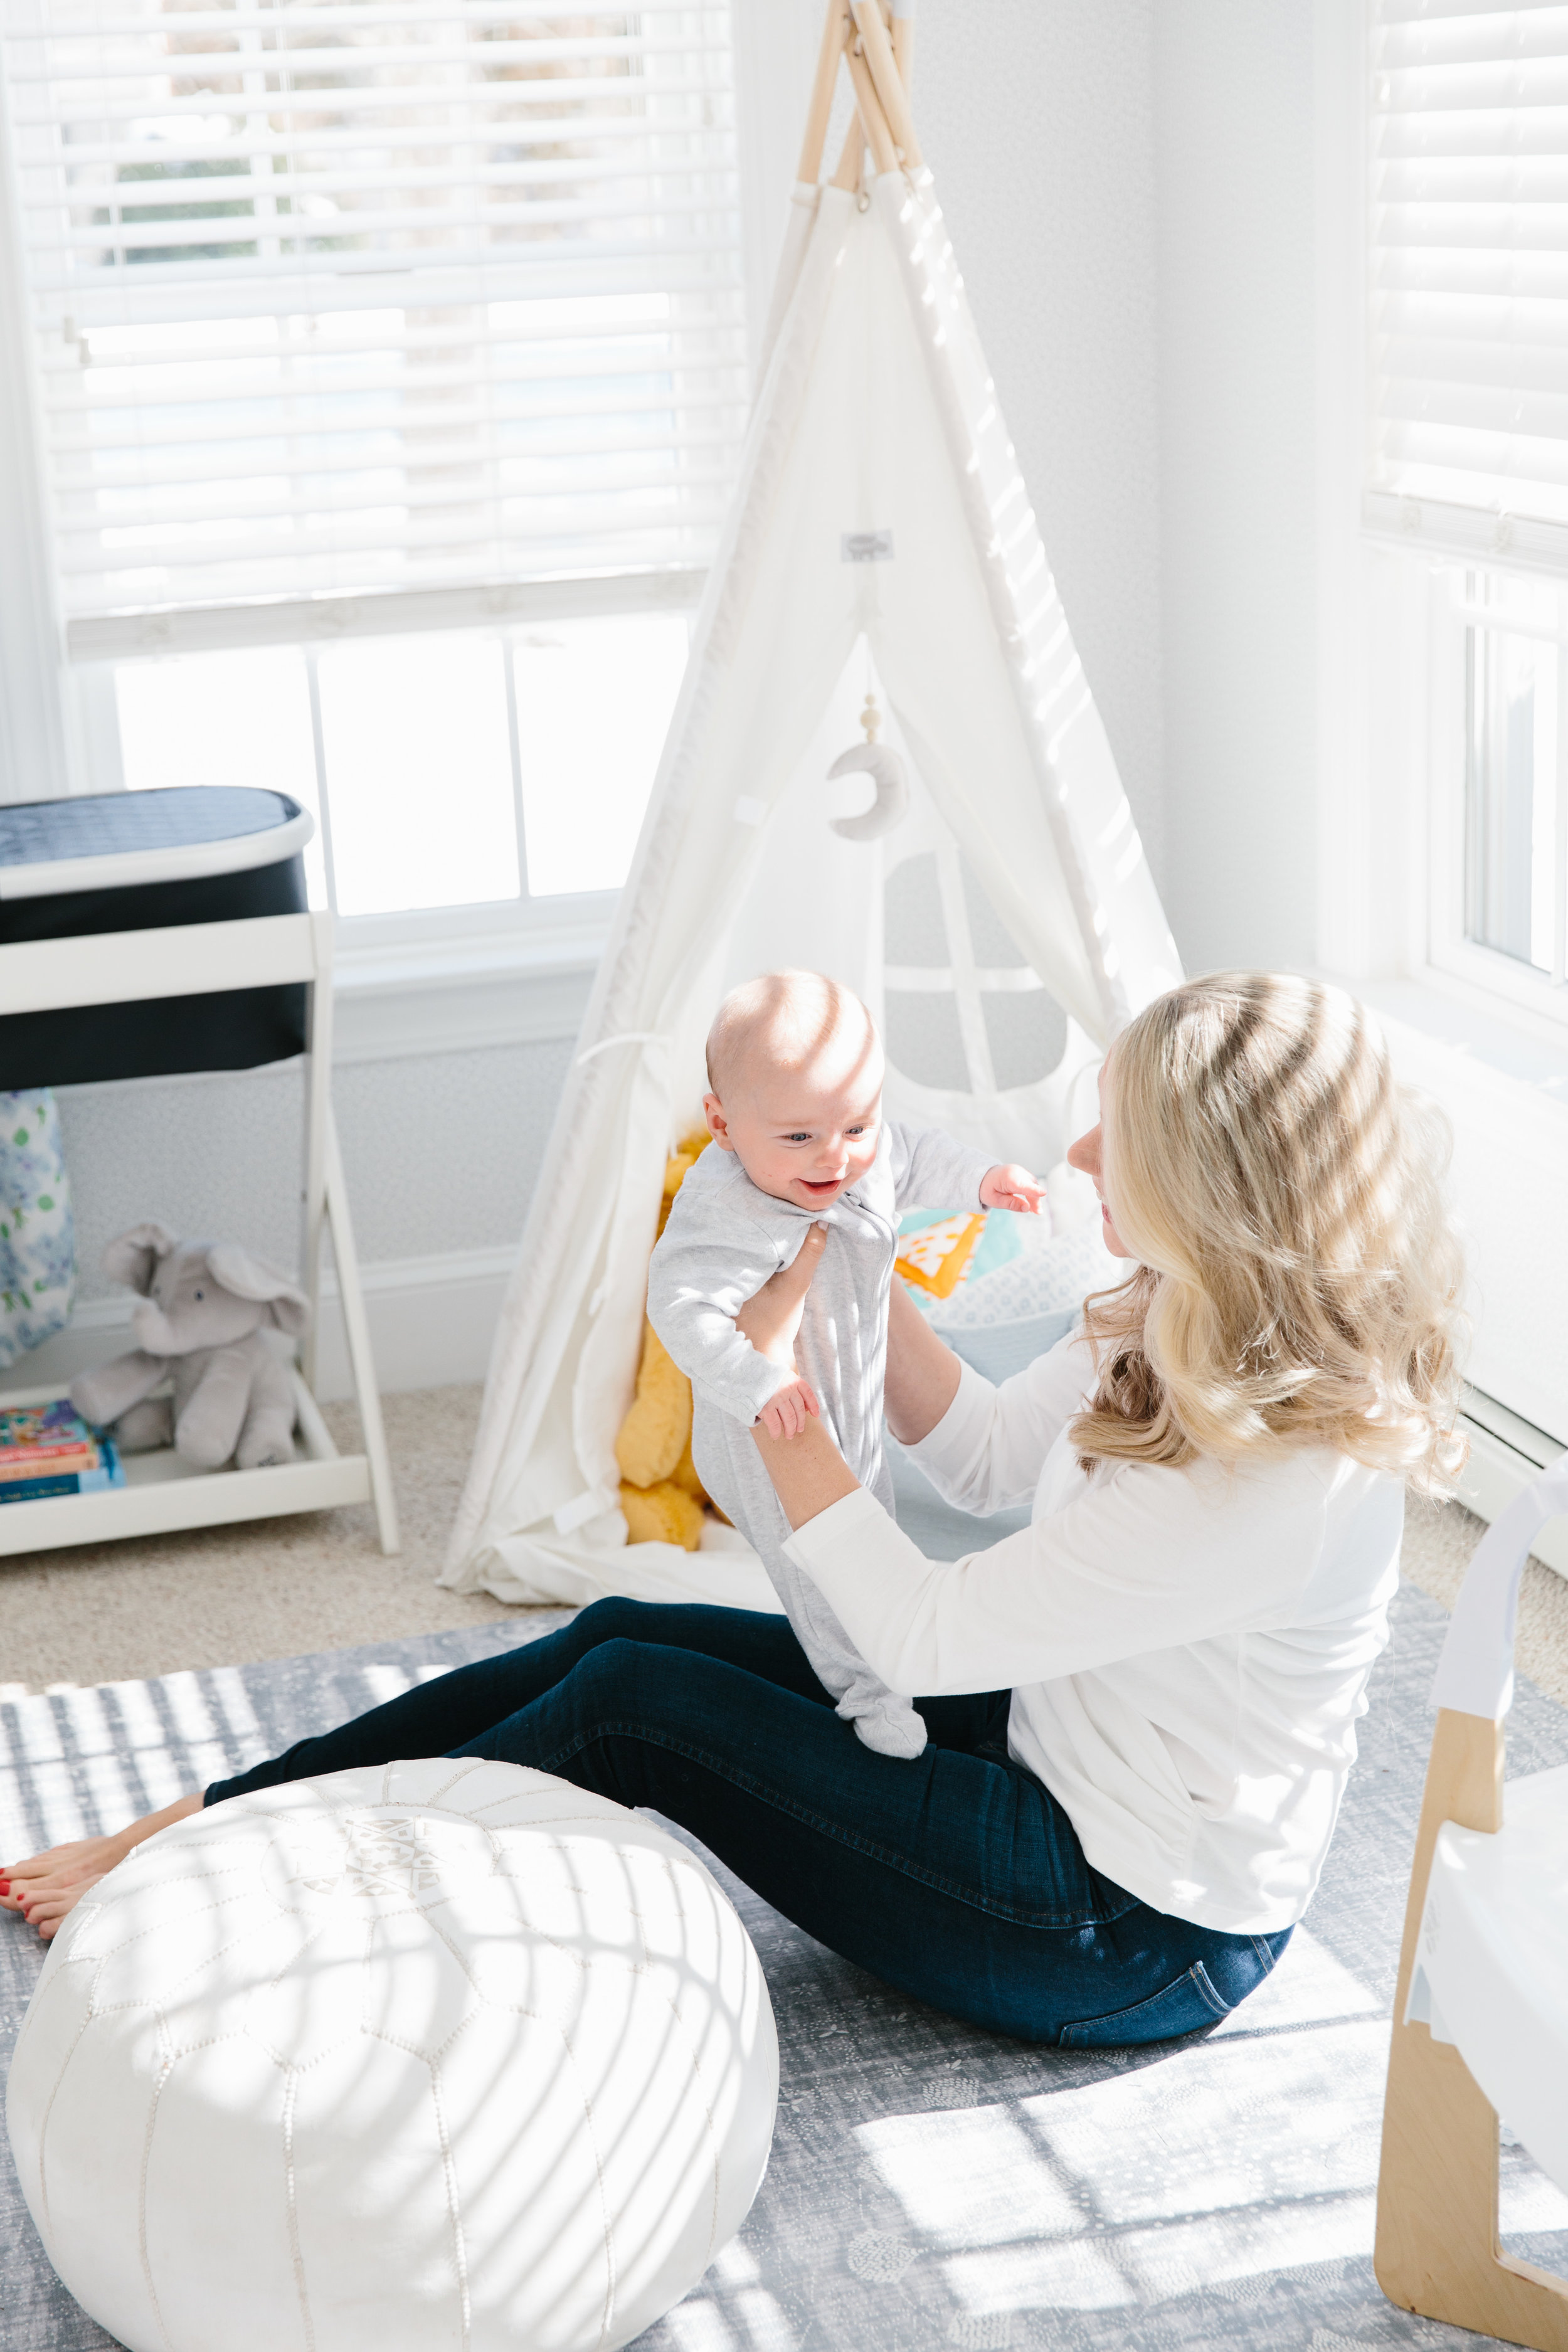 Newborn - 4 Month Old: Baby Gear You Actually Use — Abby Capalbo